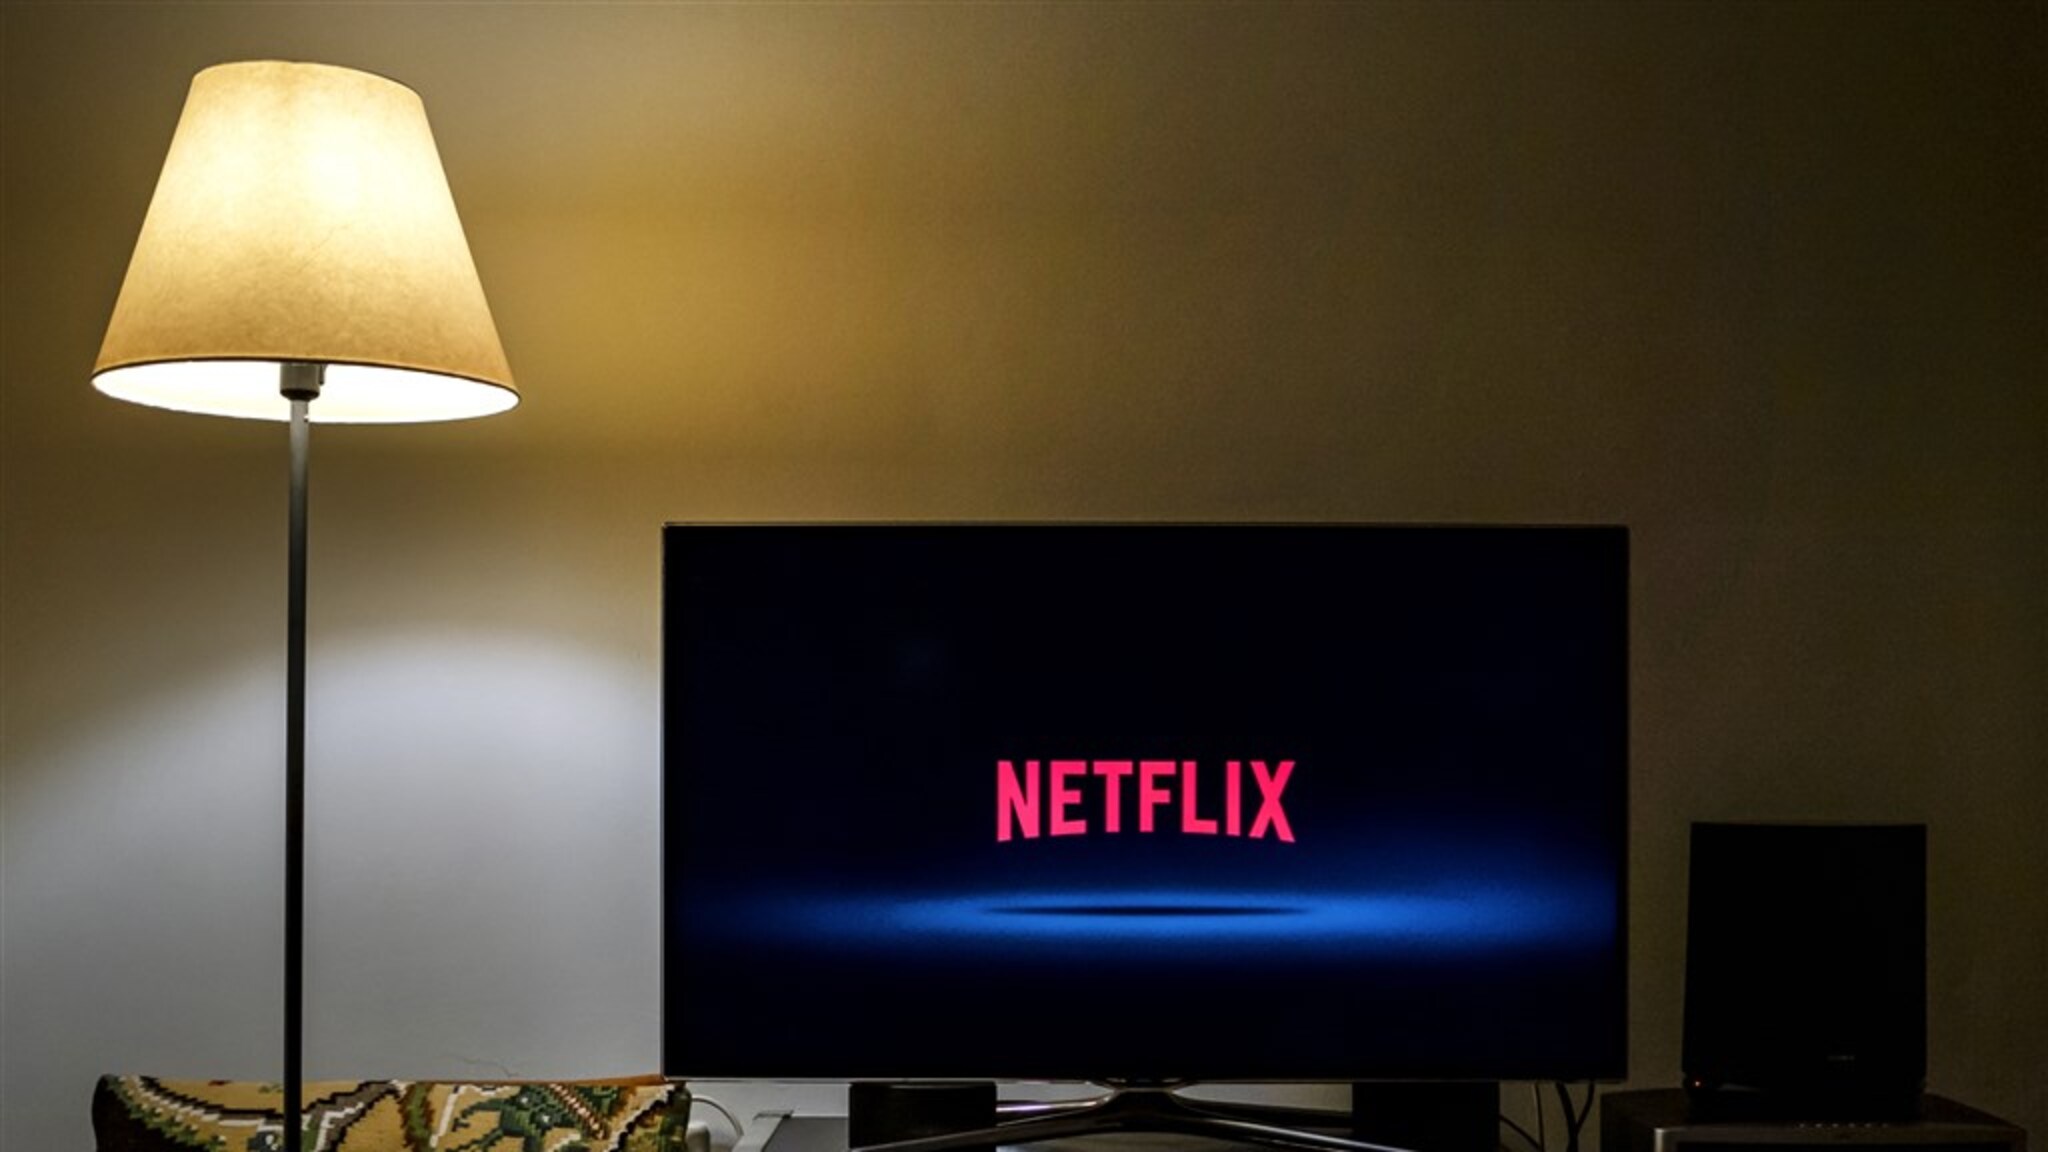 Netflix's trick works: The streaming service gains nearly 9 million subscribers